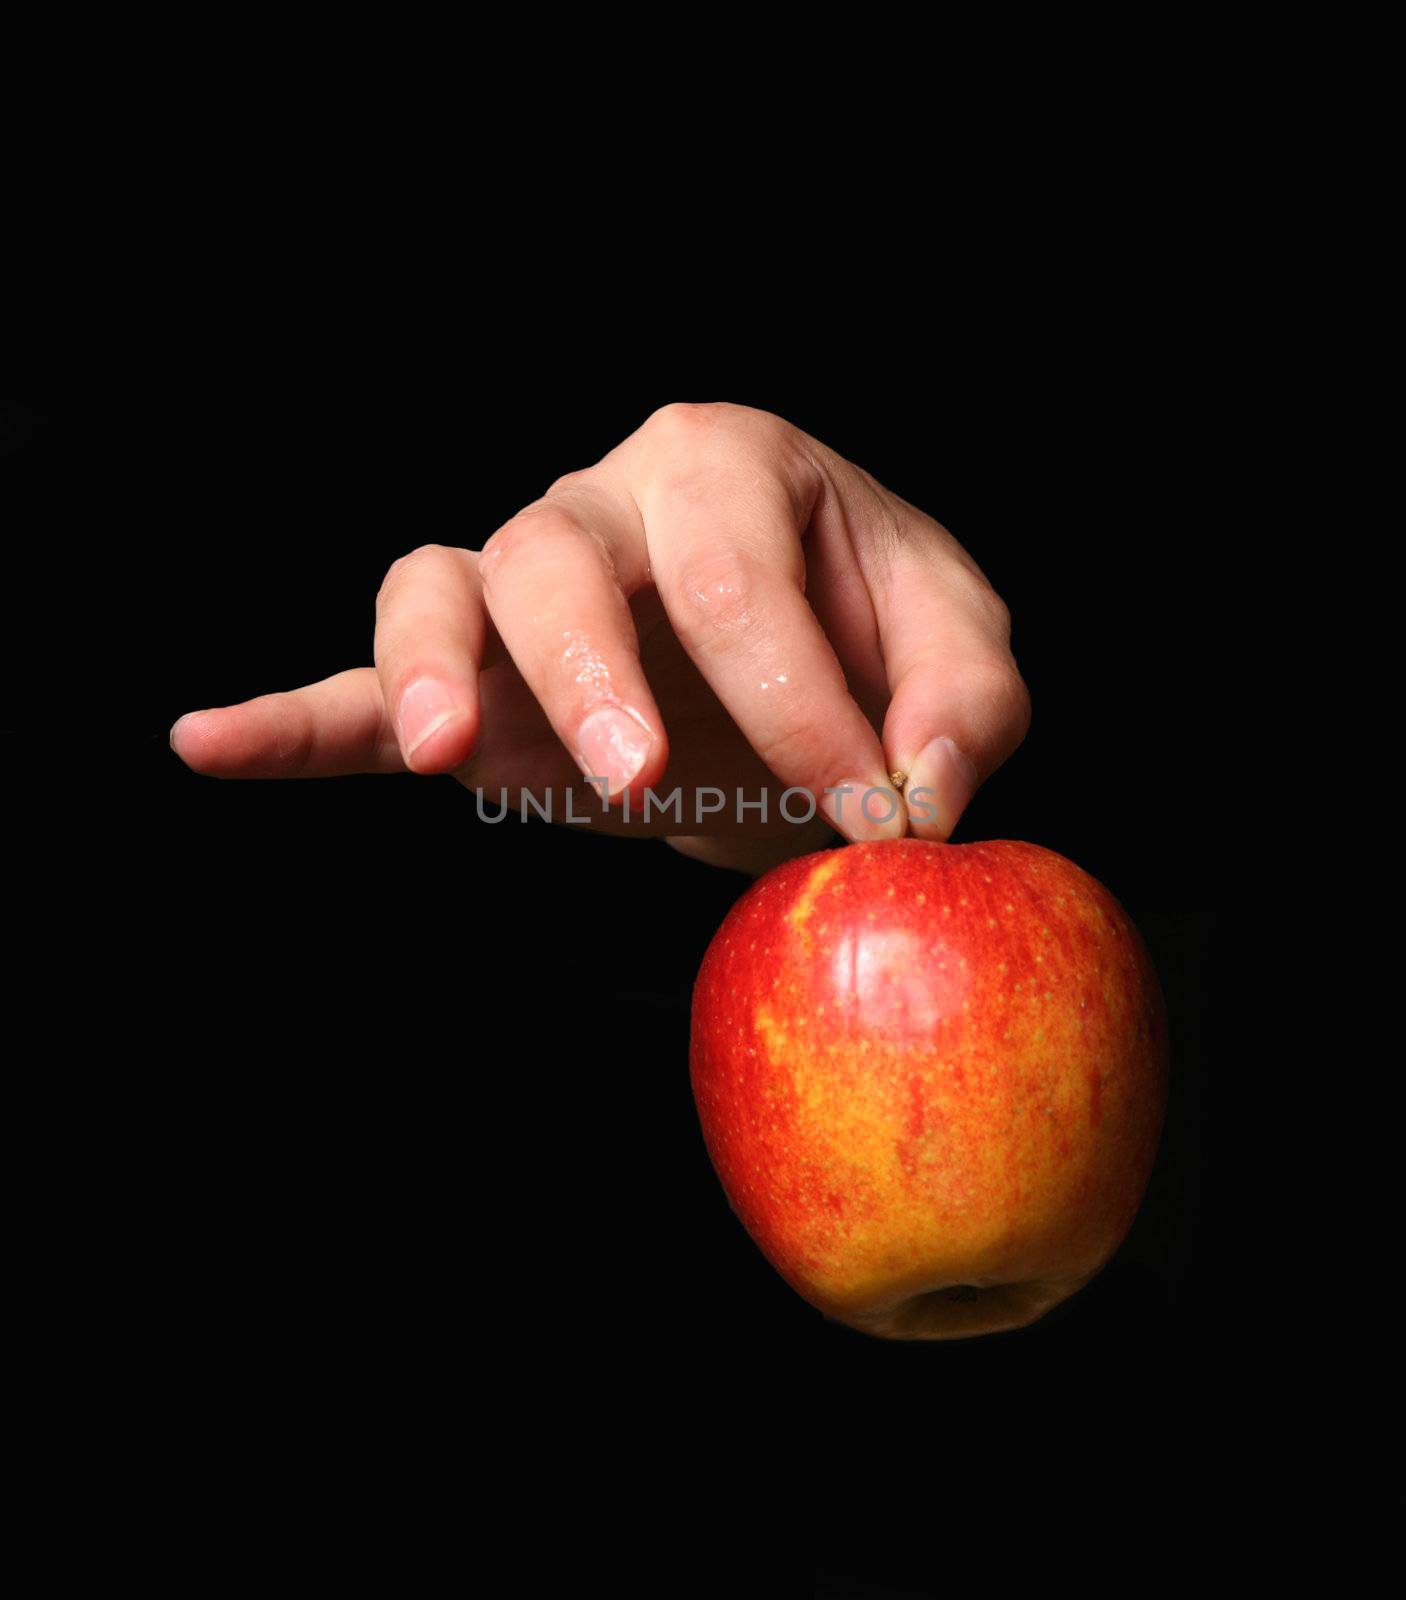 Man's hand with a red apple on a black background